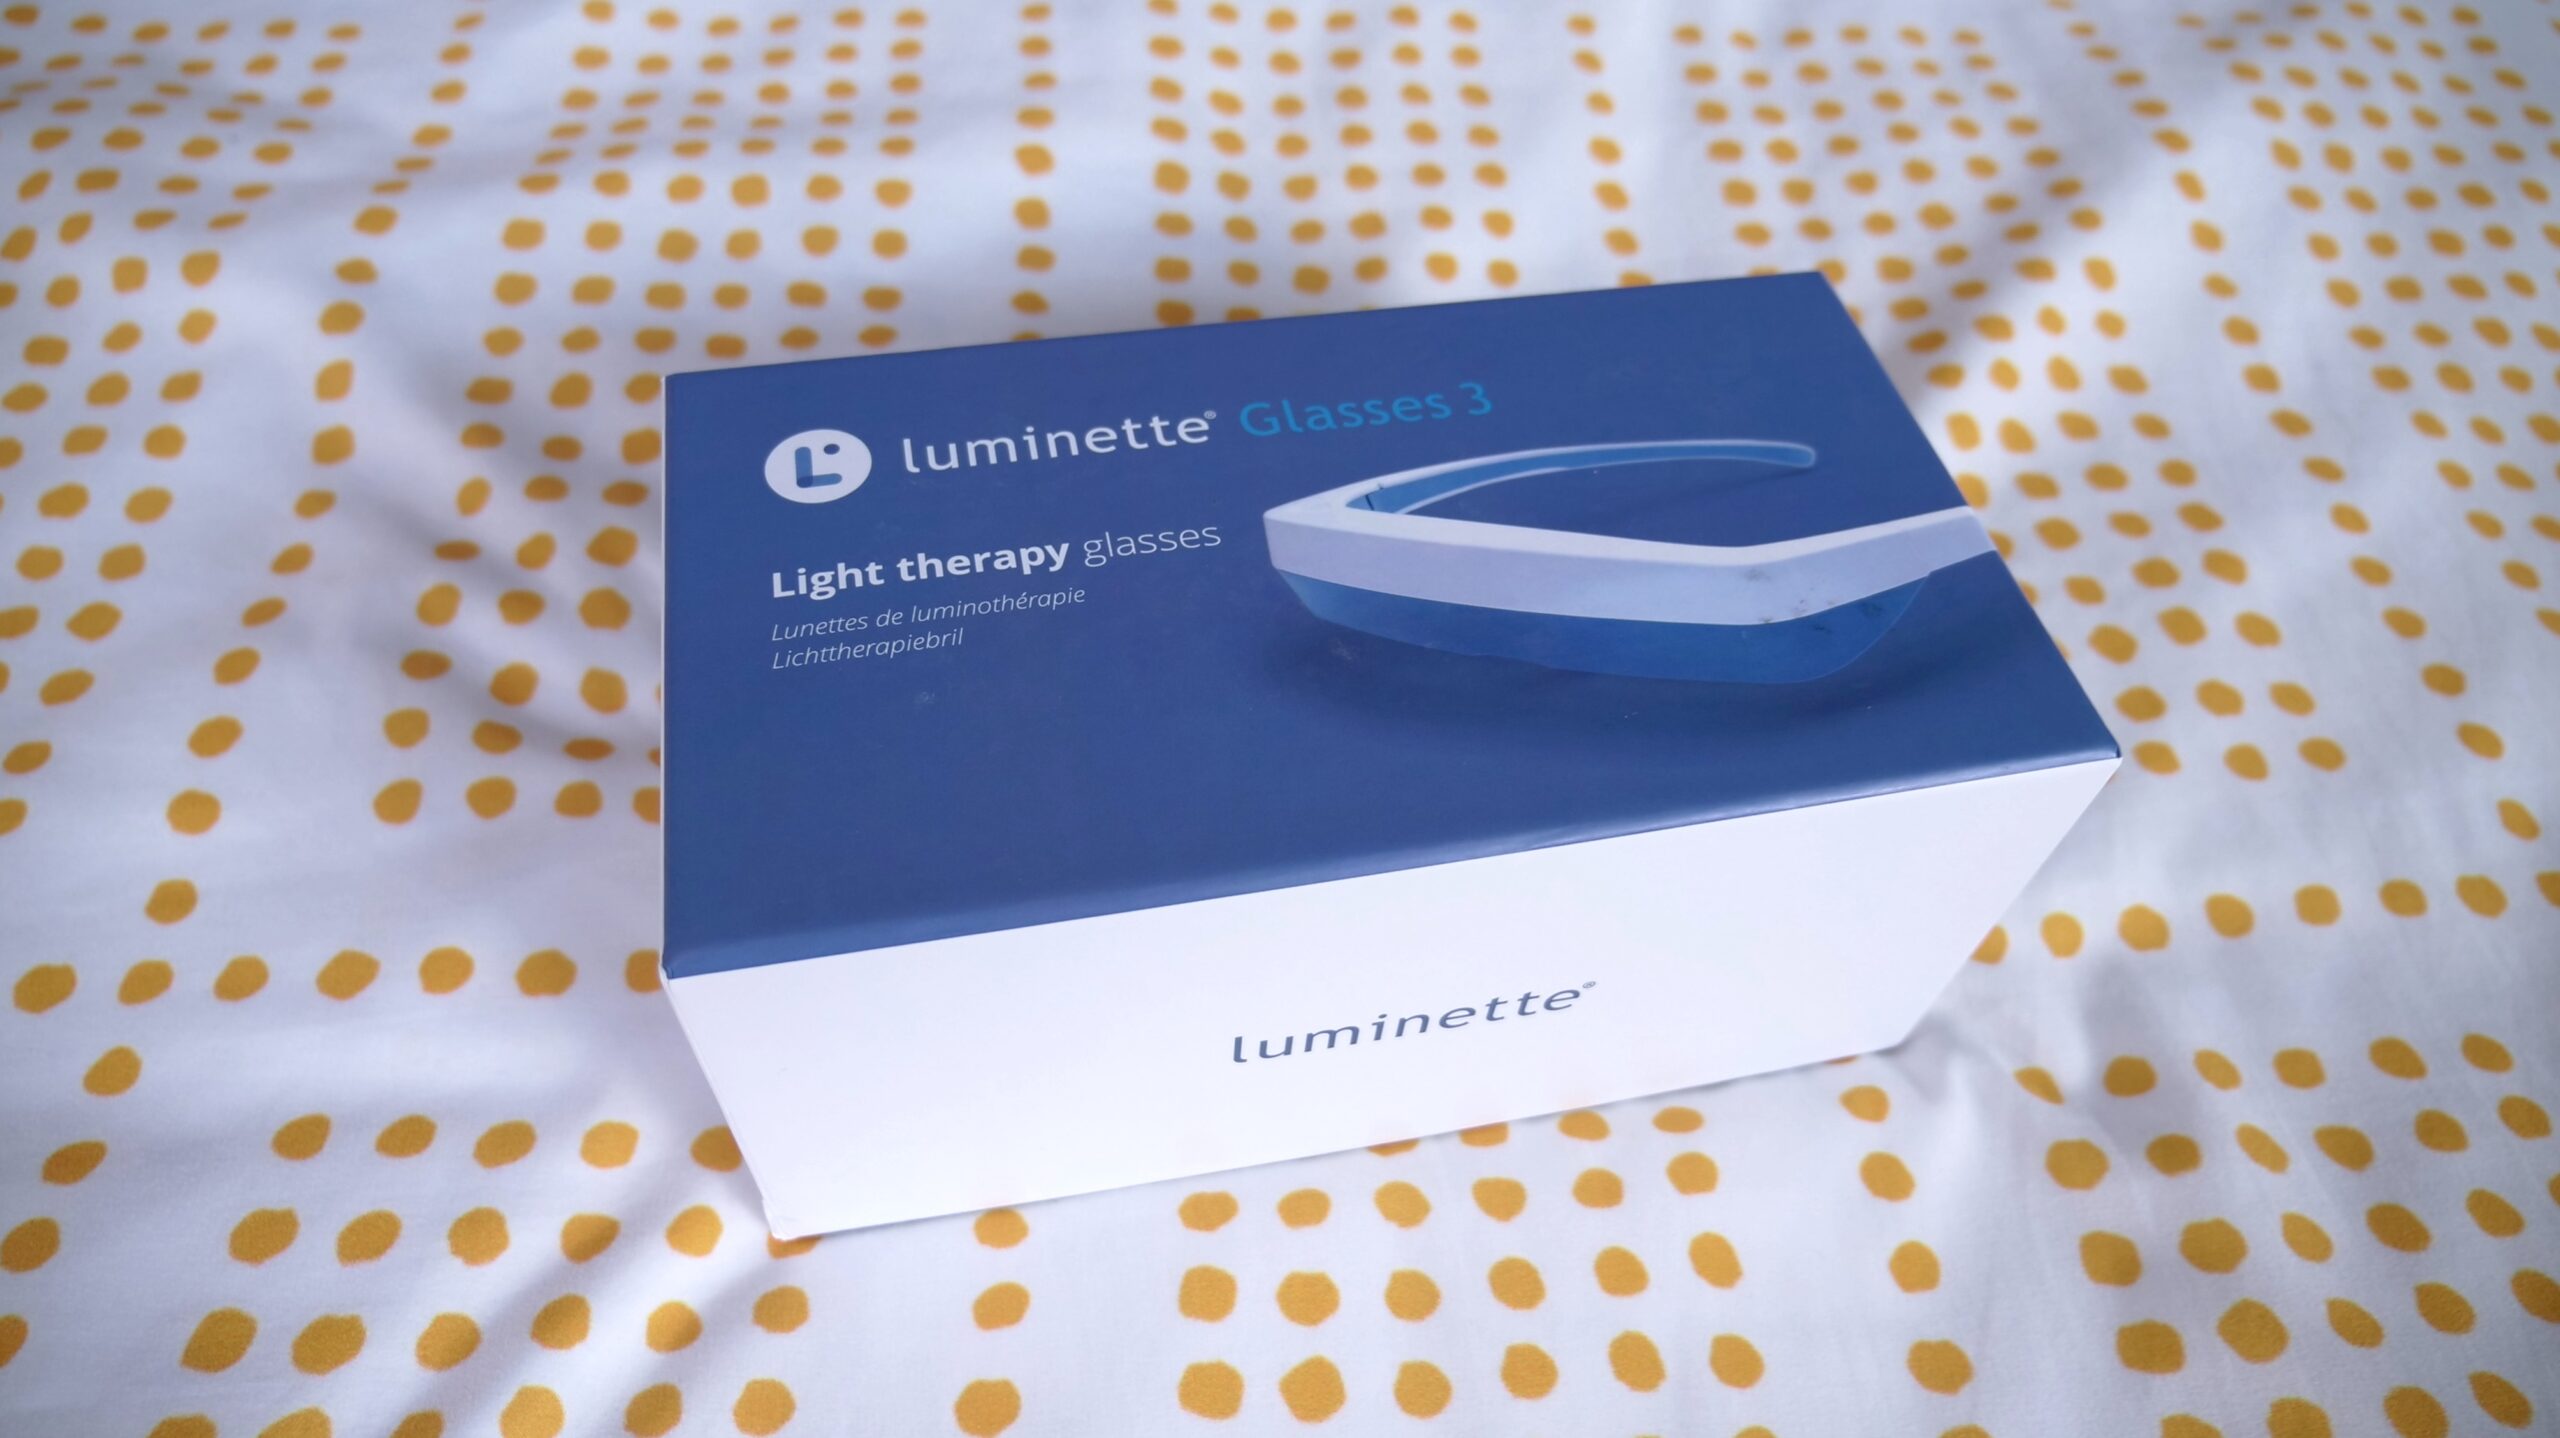 Luminette 3 – Light Therapy Glasses – Michigan Disability Rights Coalition